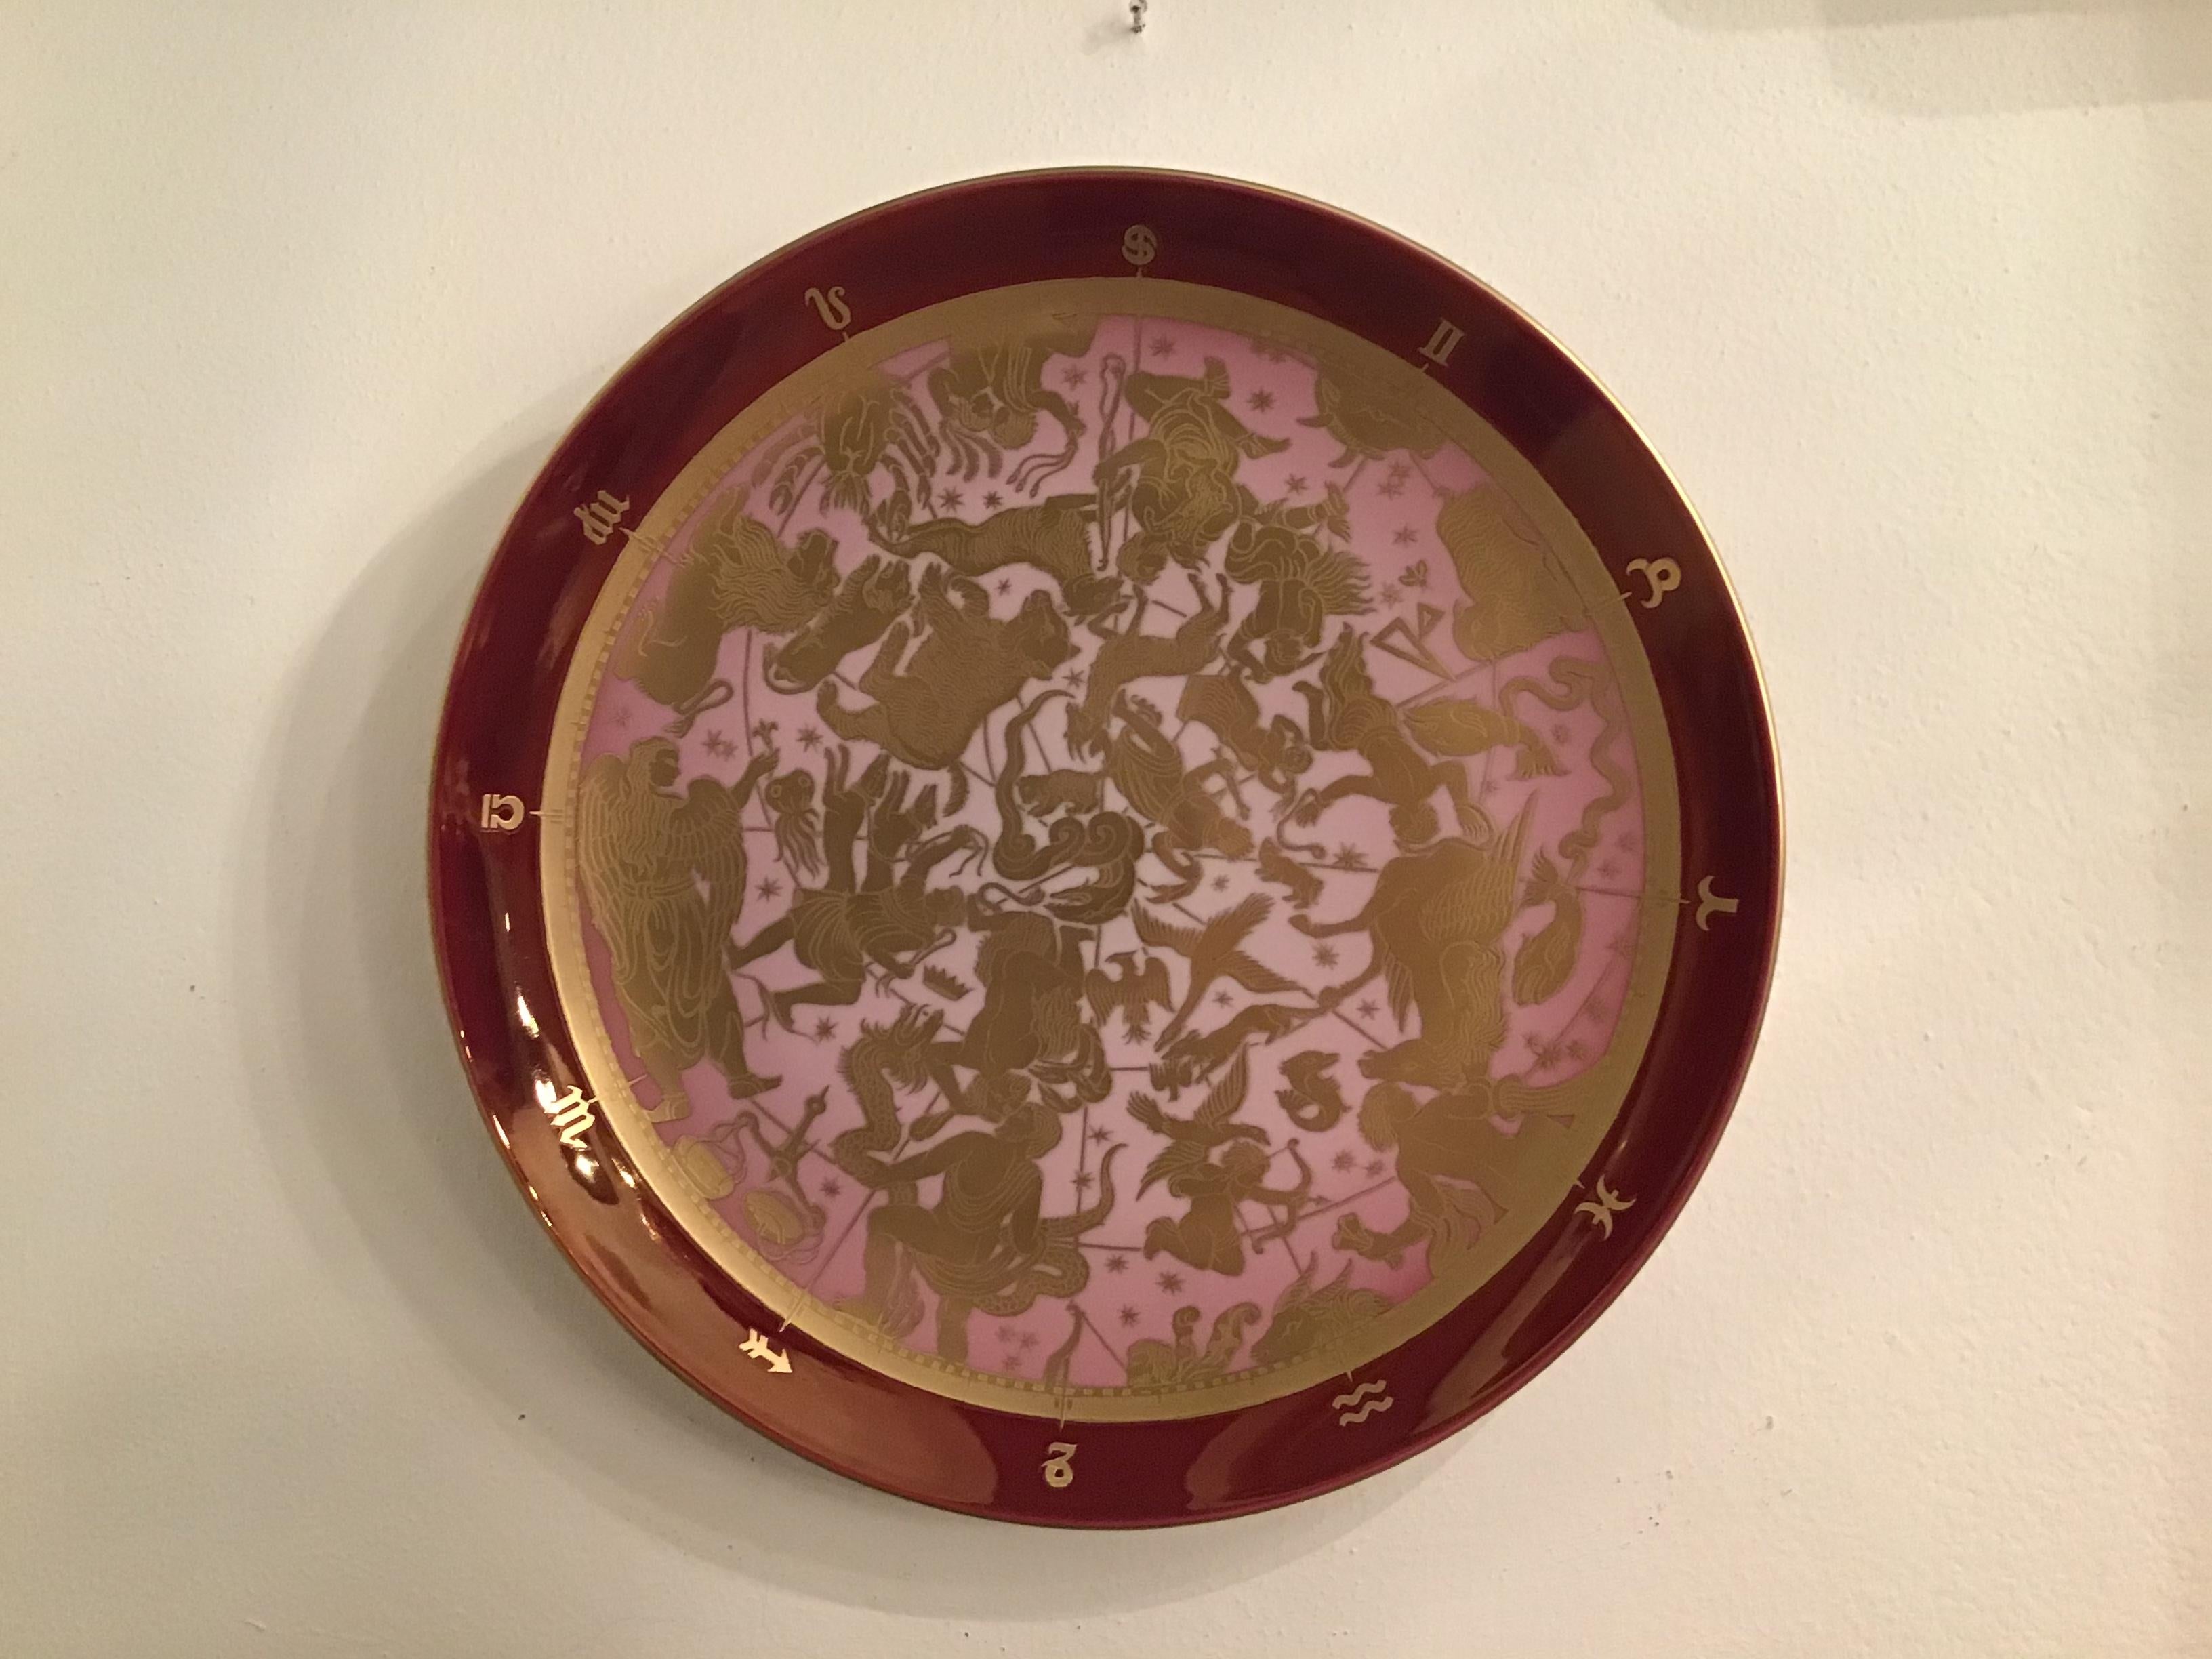 Morbelli Porcelain Wall Plate “Planisfero Celeste” Worked with Pure Gold 1960 It For Sale 2